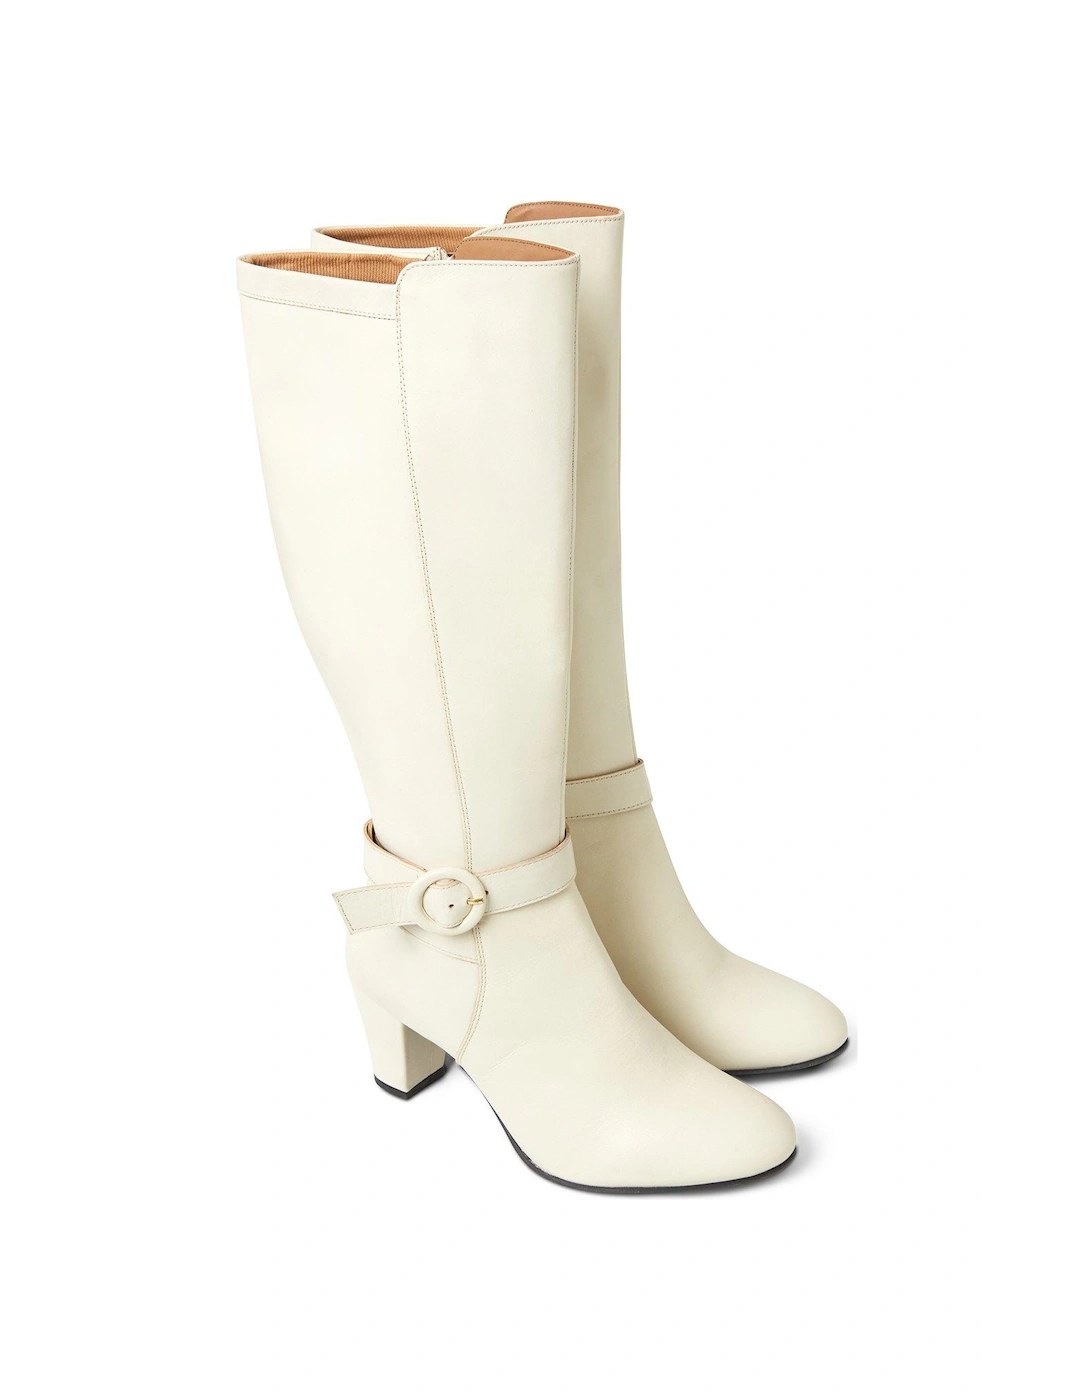 About Town Tall Leather Boots - White, 3 of 2